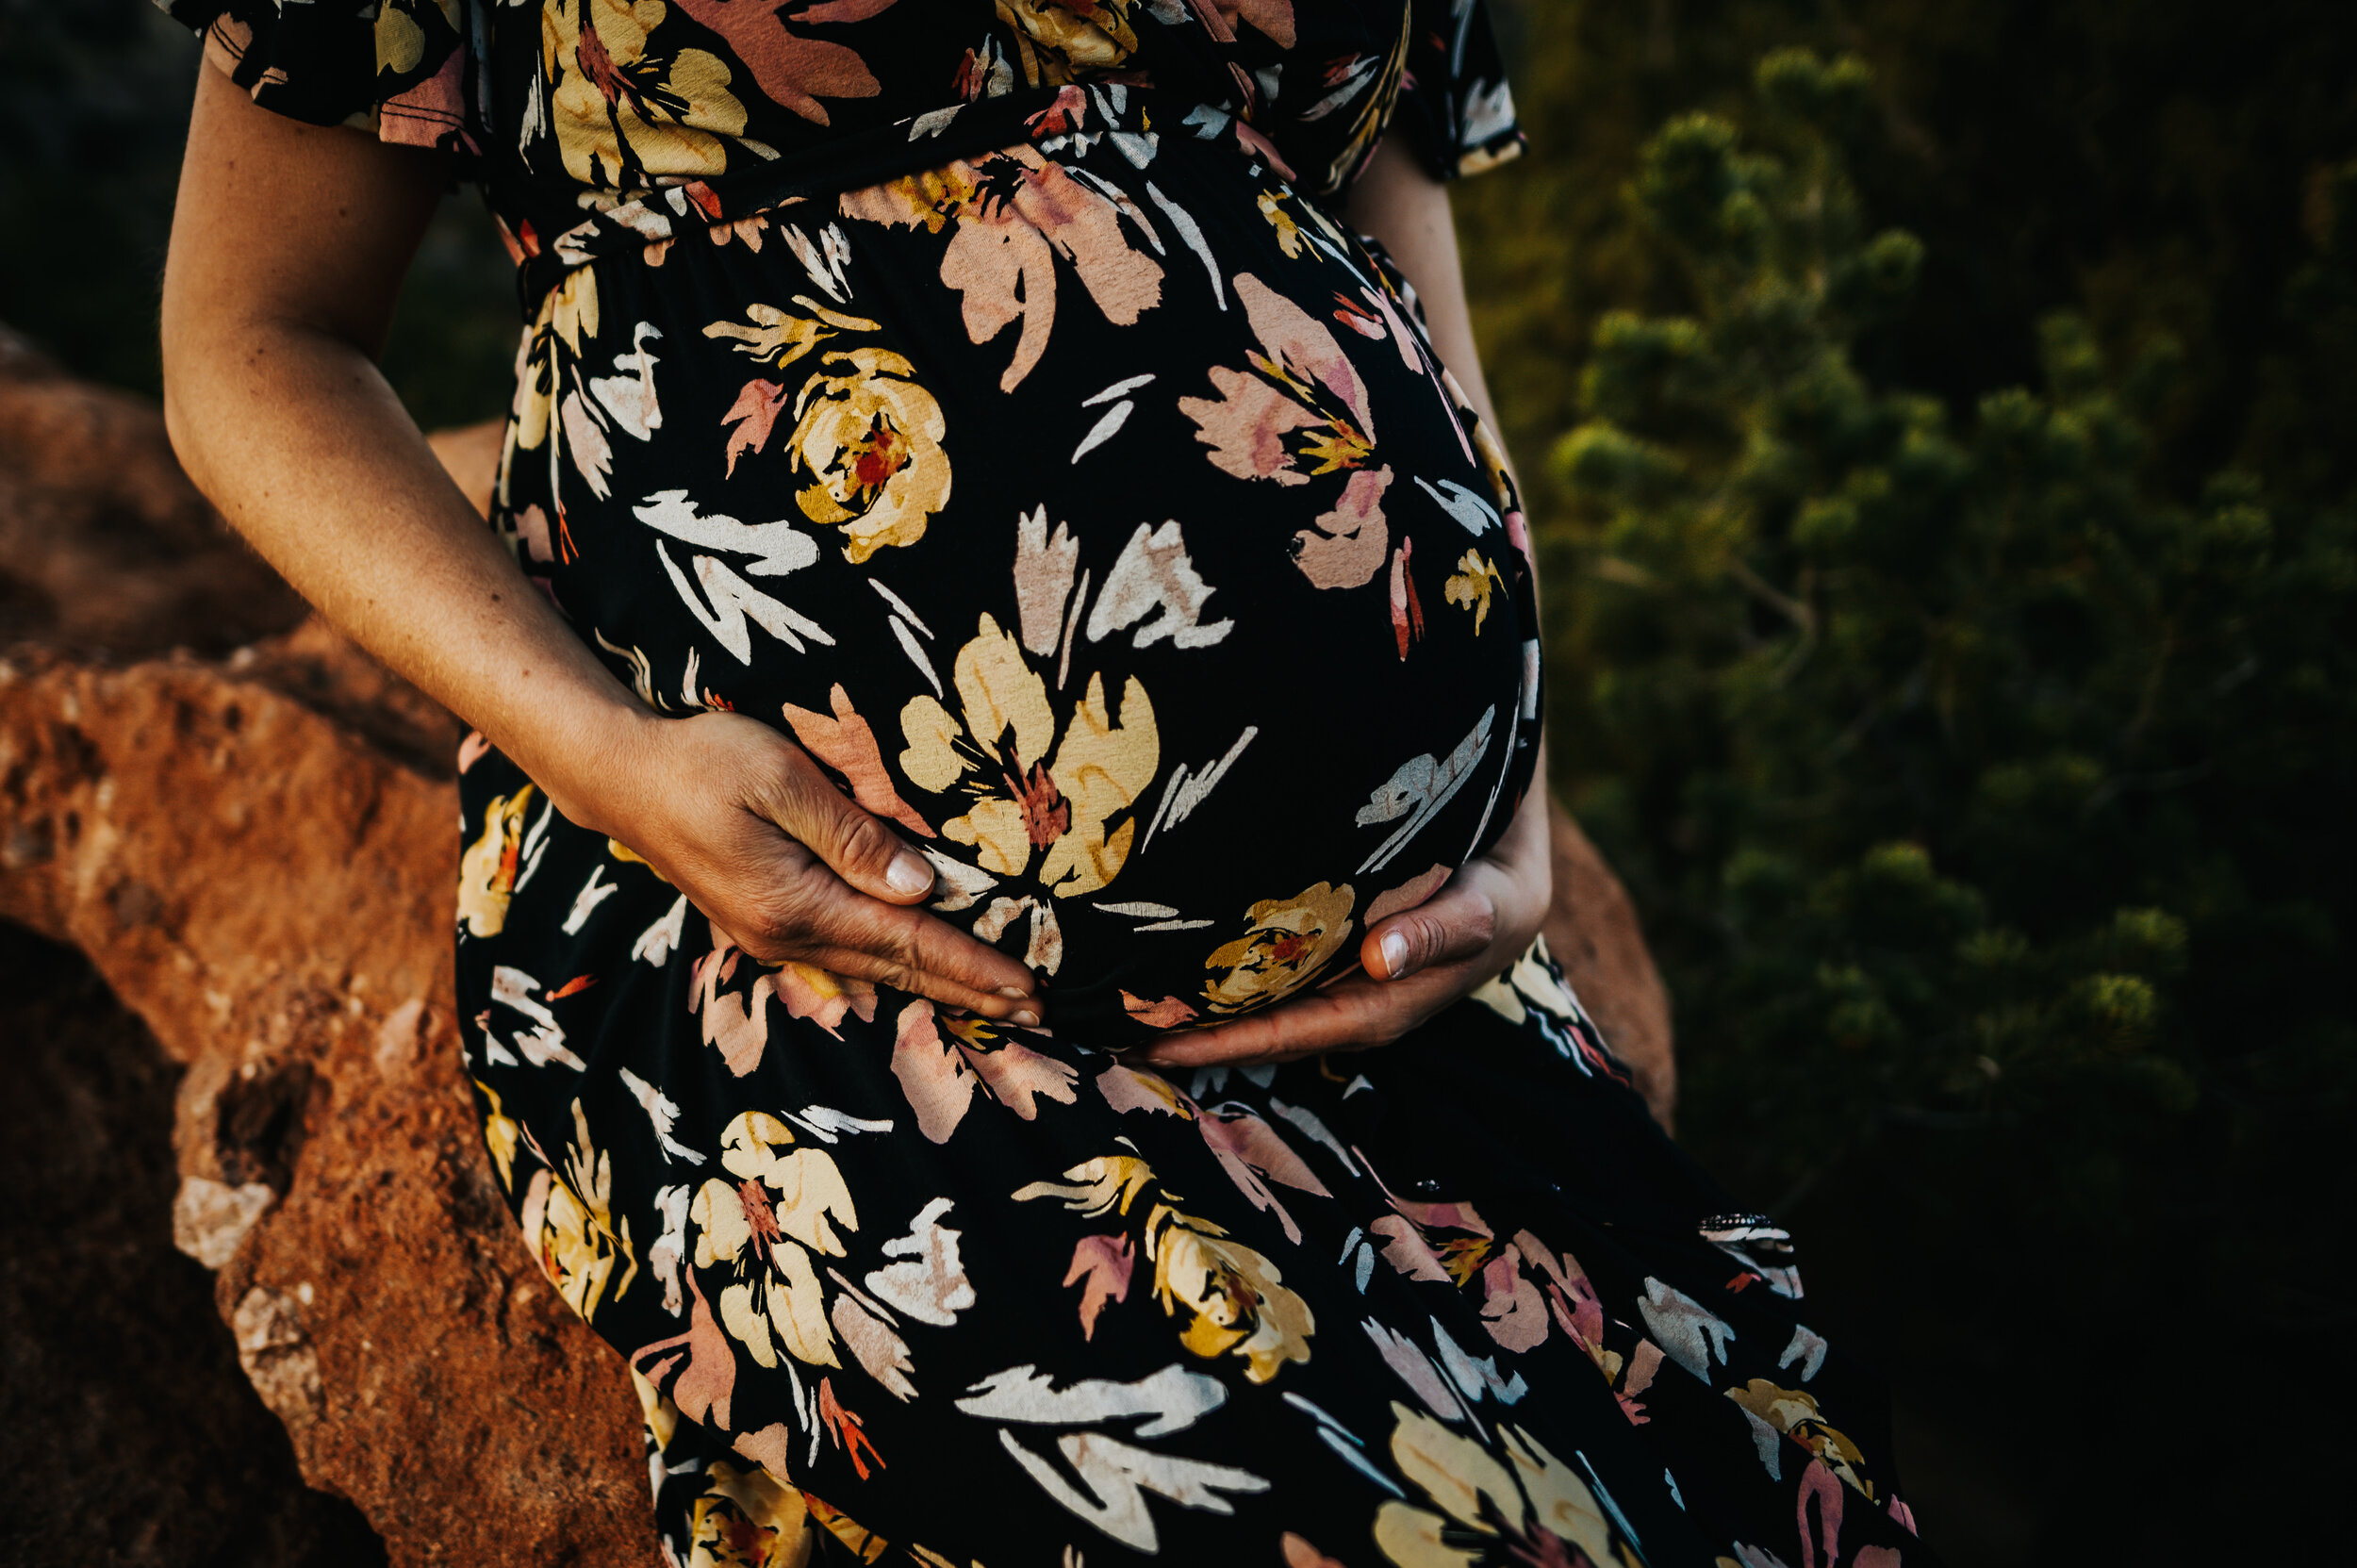 Andrea Grimm Maternity Family Session Colorado Springs Sunset Garden of the Gods Wild Prairie Photography-14-2020.jpg